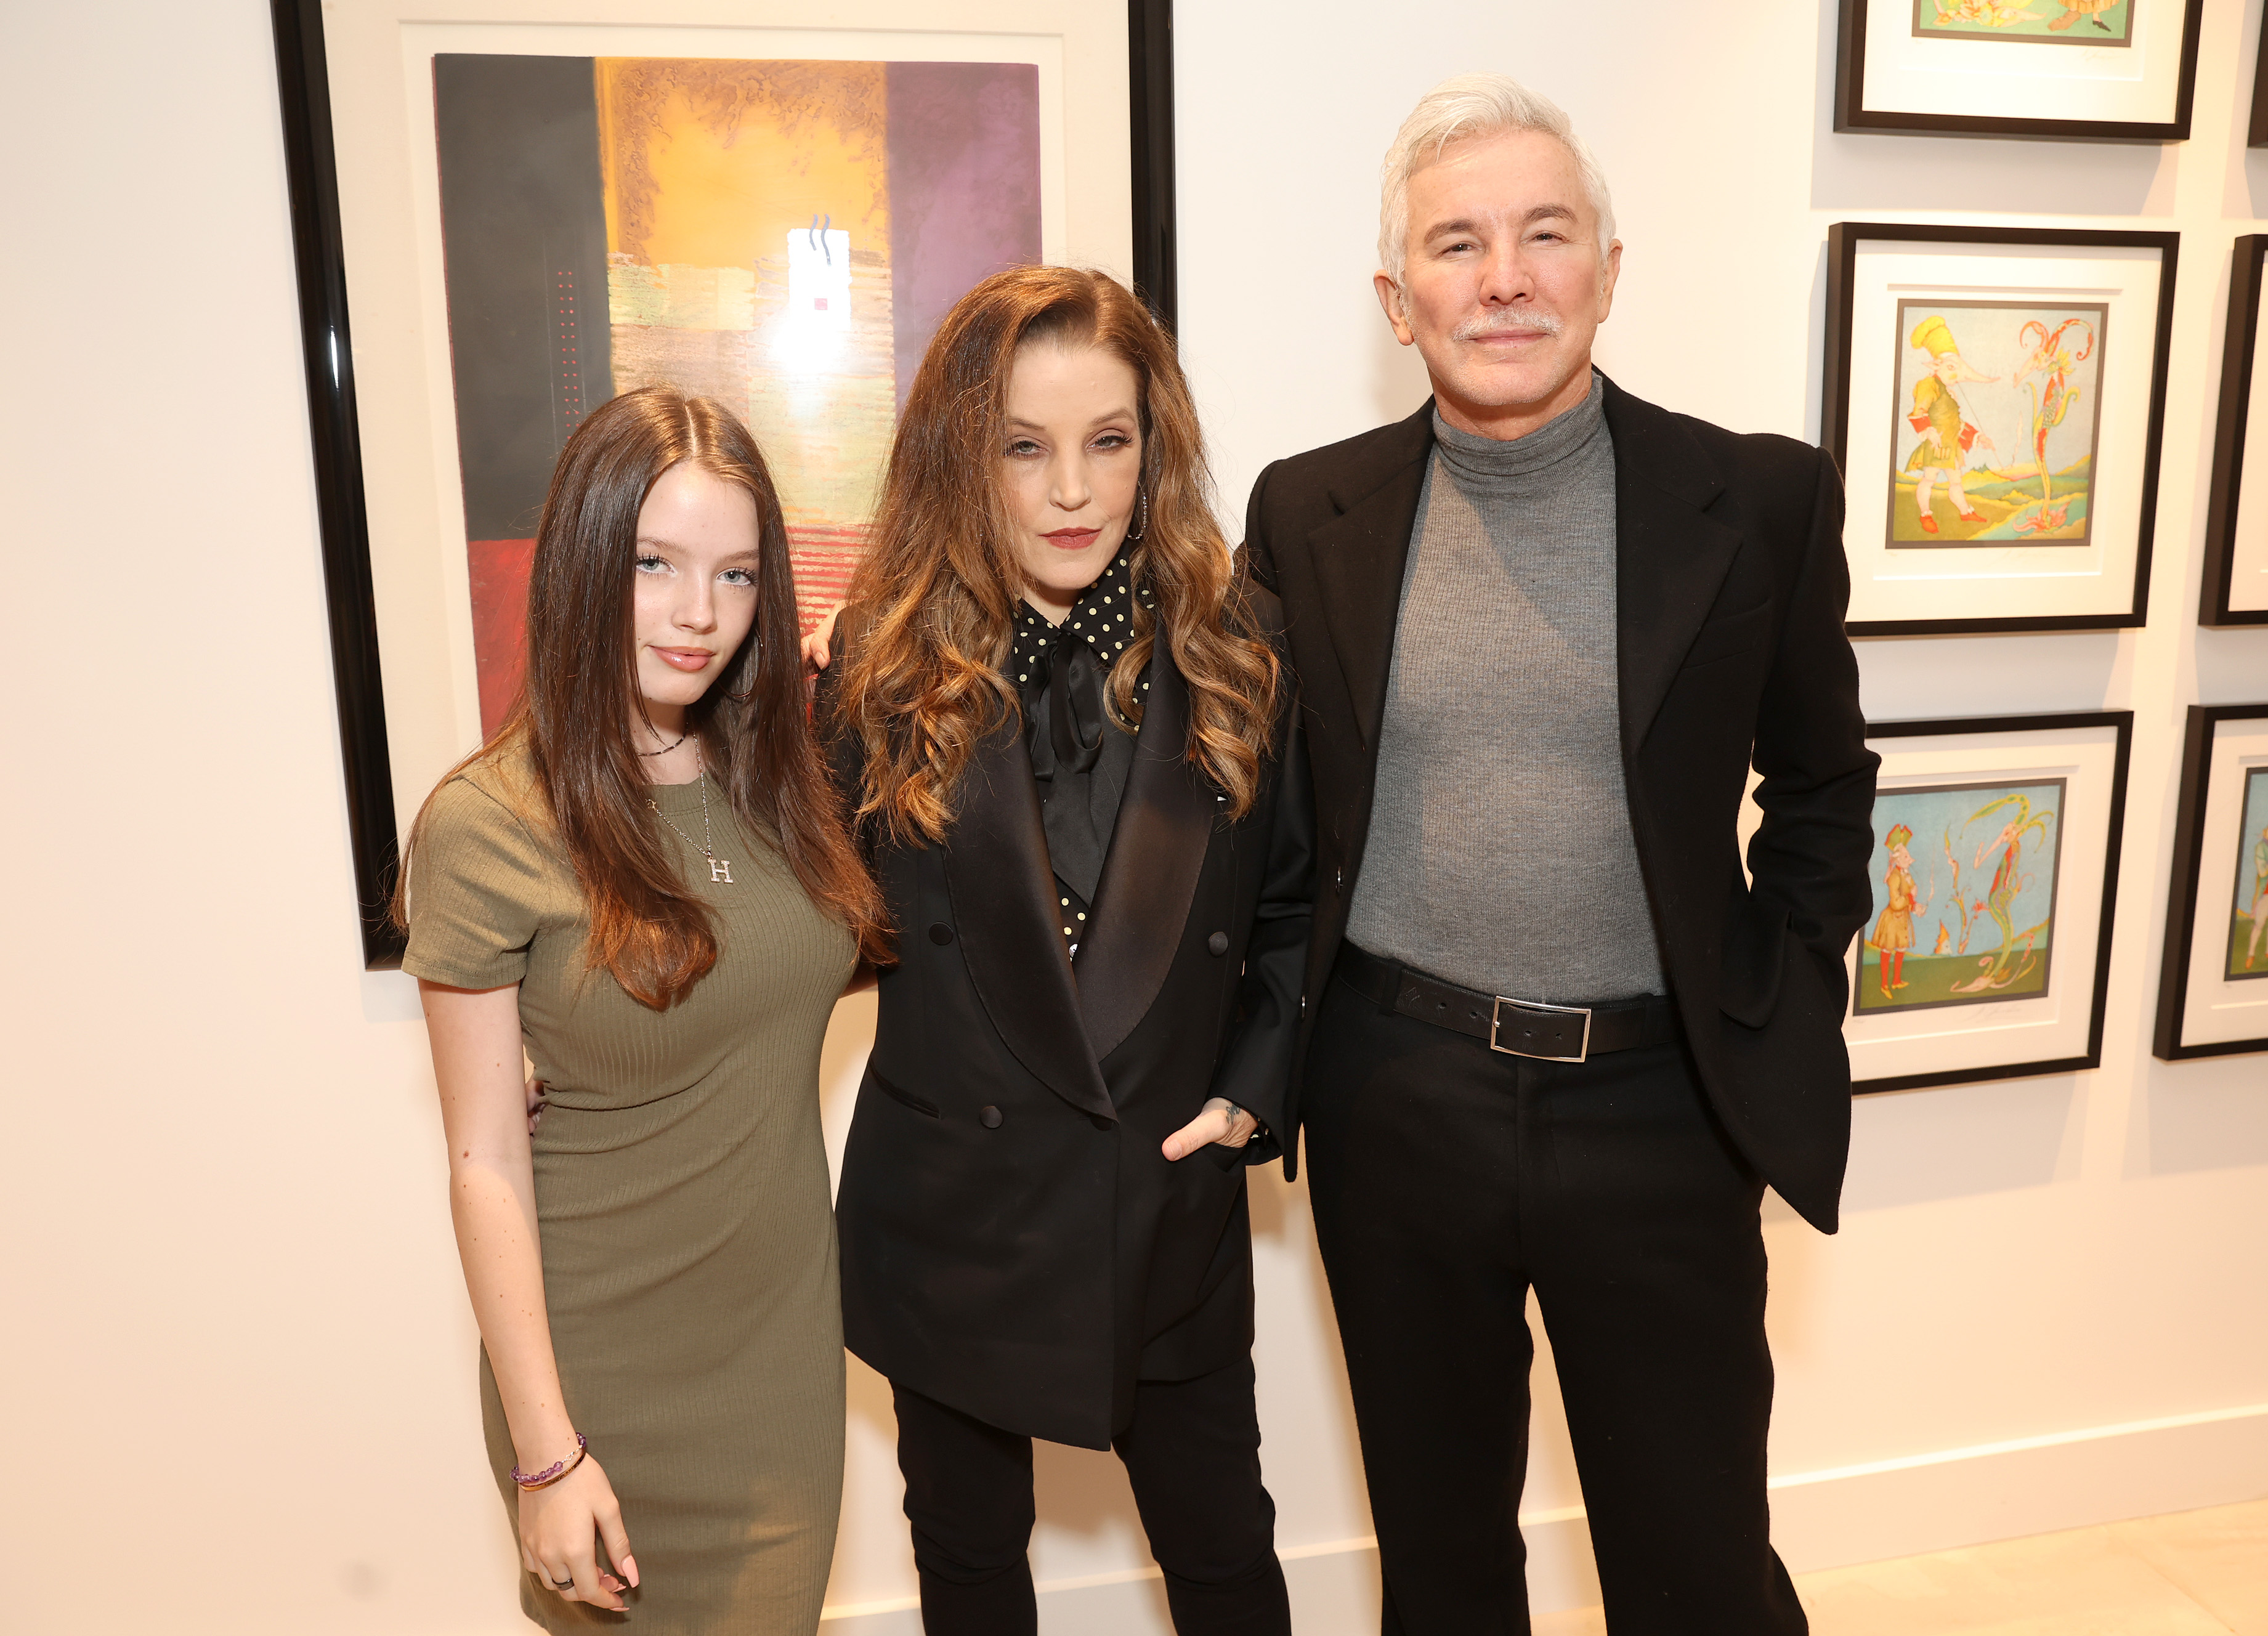 Harper Presley Lockwood, Lisa Marie Presley, and Baz Luhrmann attend THR Presents Live: ELVIS @ Ross House on December 10, 2022, in Los Angeles, California. | Source: Getty Images